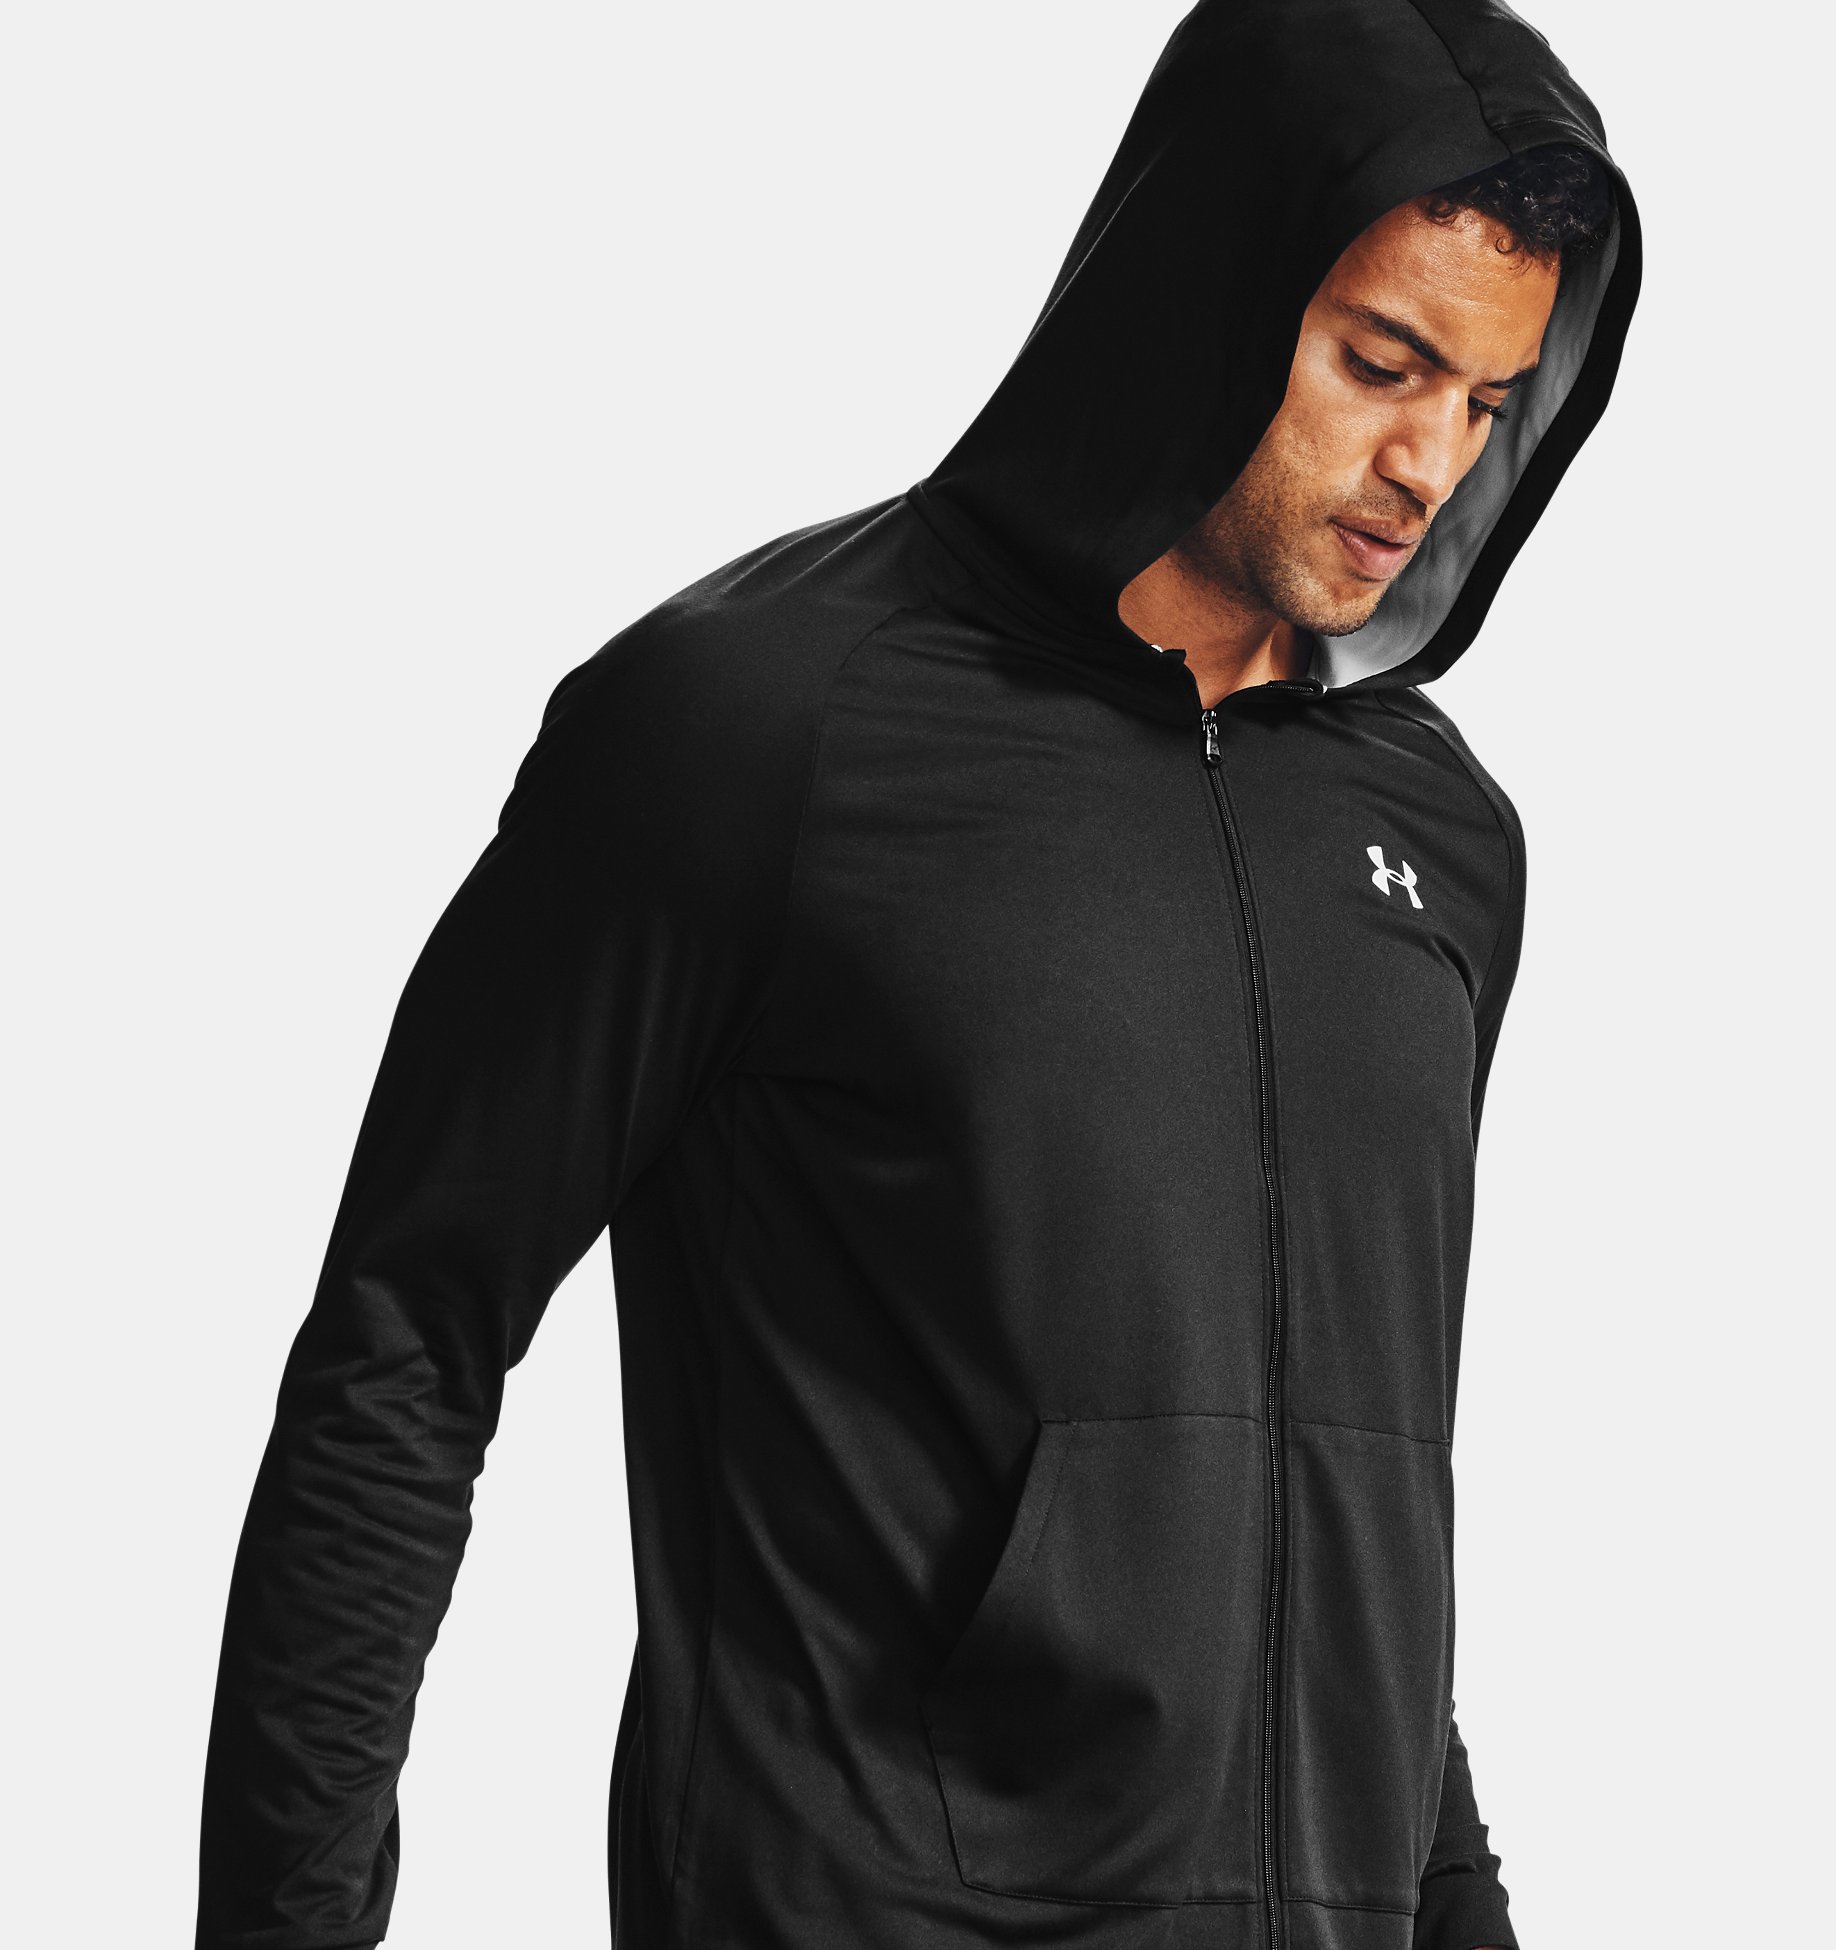 2020 Under Armour Mens Tech 2.0 Full Zip Hoodie UA Gym Fitness Training Top 